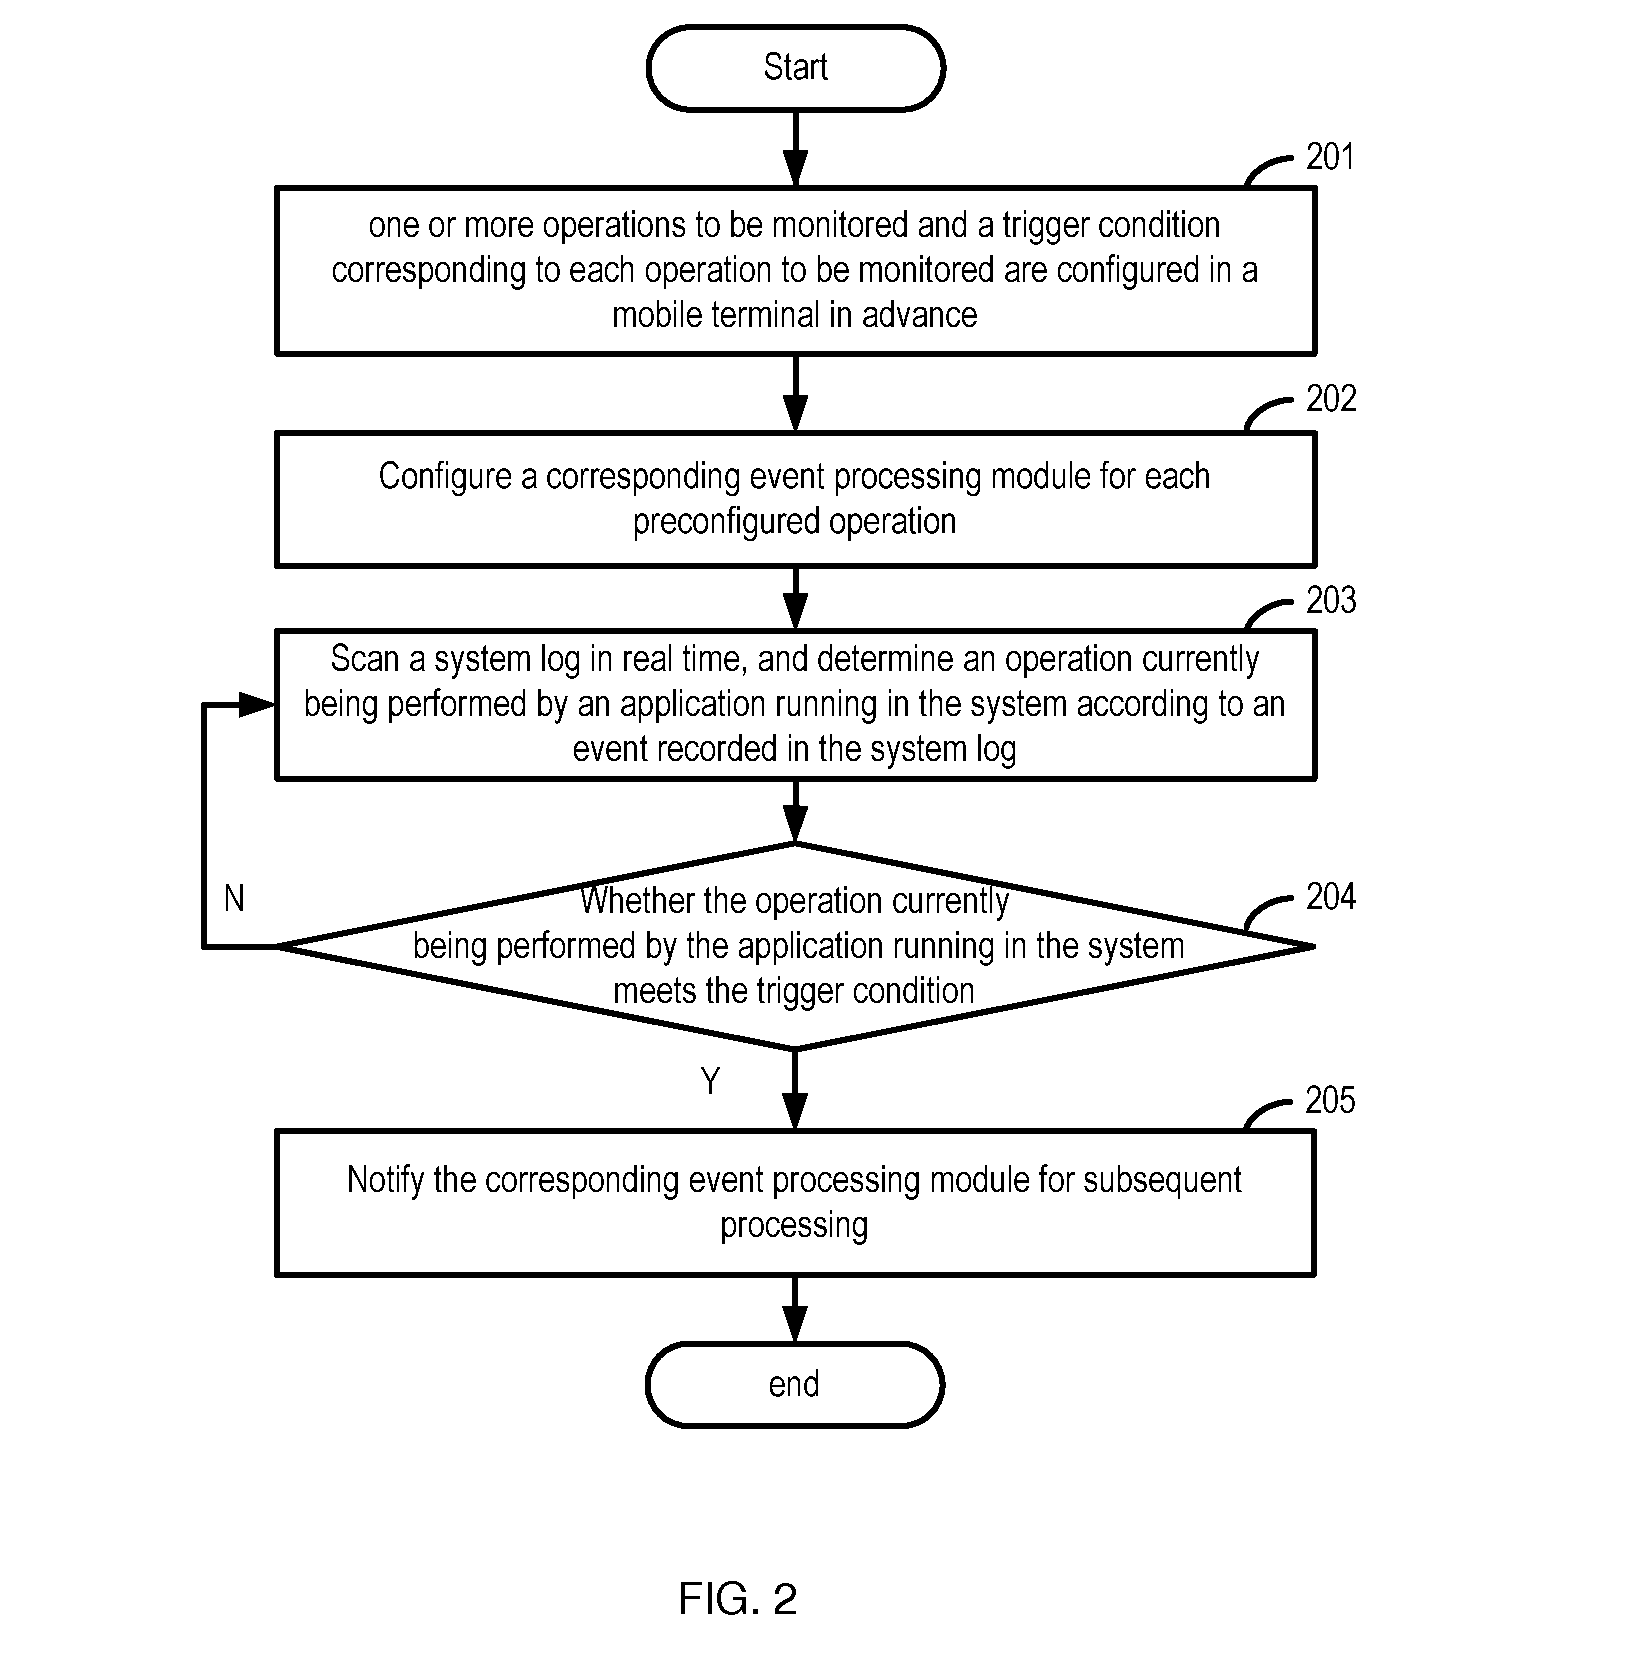 Method and apparatus for monitoring a predefined operation in a mobile terminal